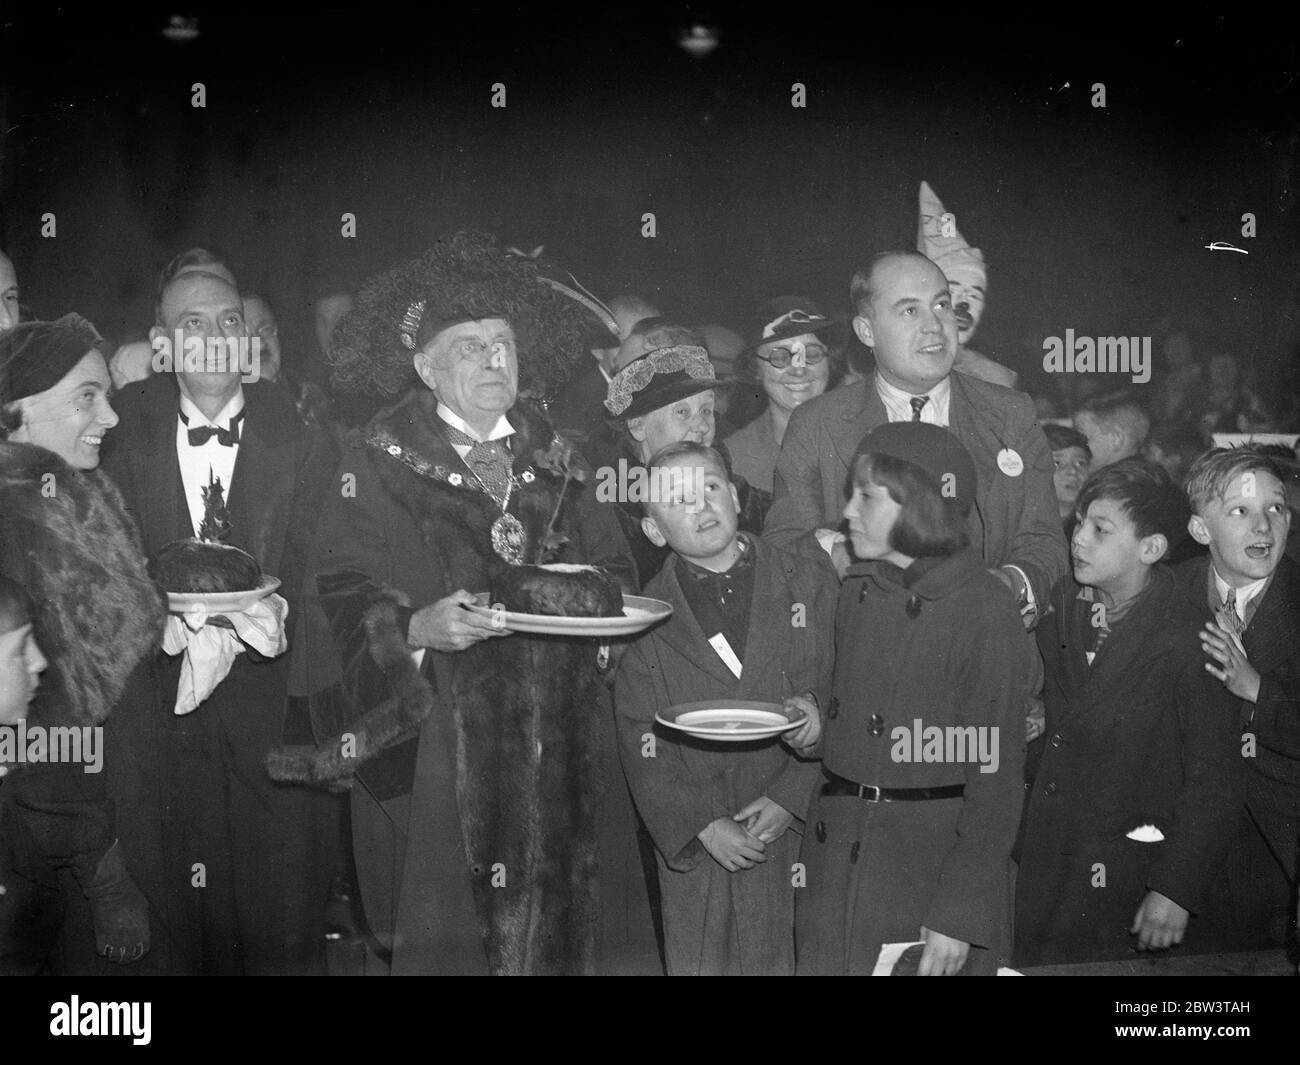 Lord Mayor serves Christmas pudding at poor children 's party at Guildhall . The Lord Mayor , Sir Percy Vincent , serving the Christmas pudding at the banquet . 23 December 1935 Stock Photo